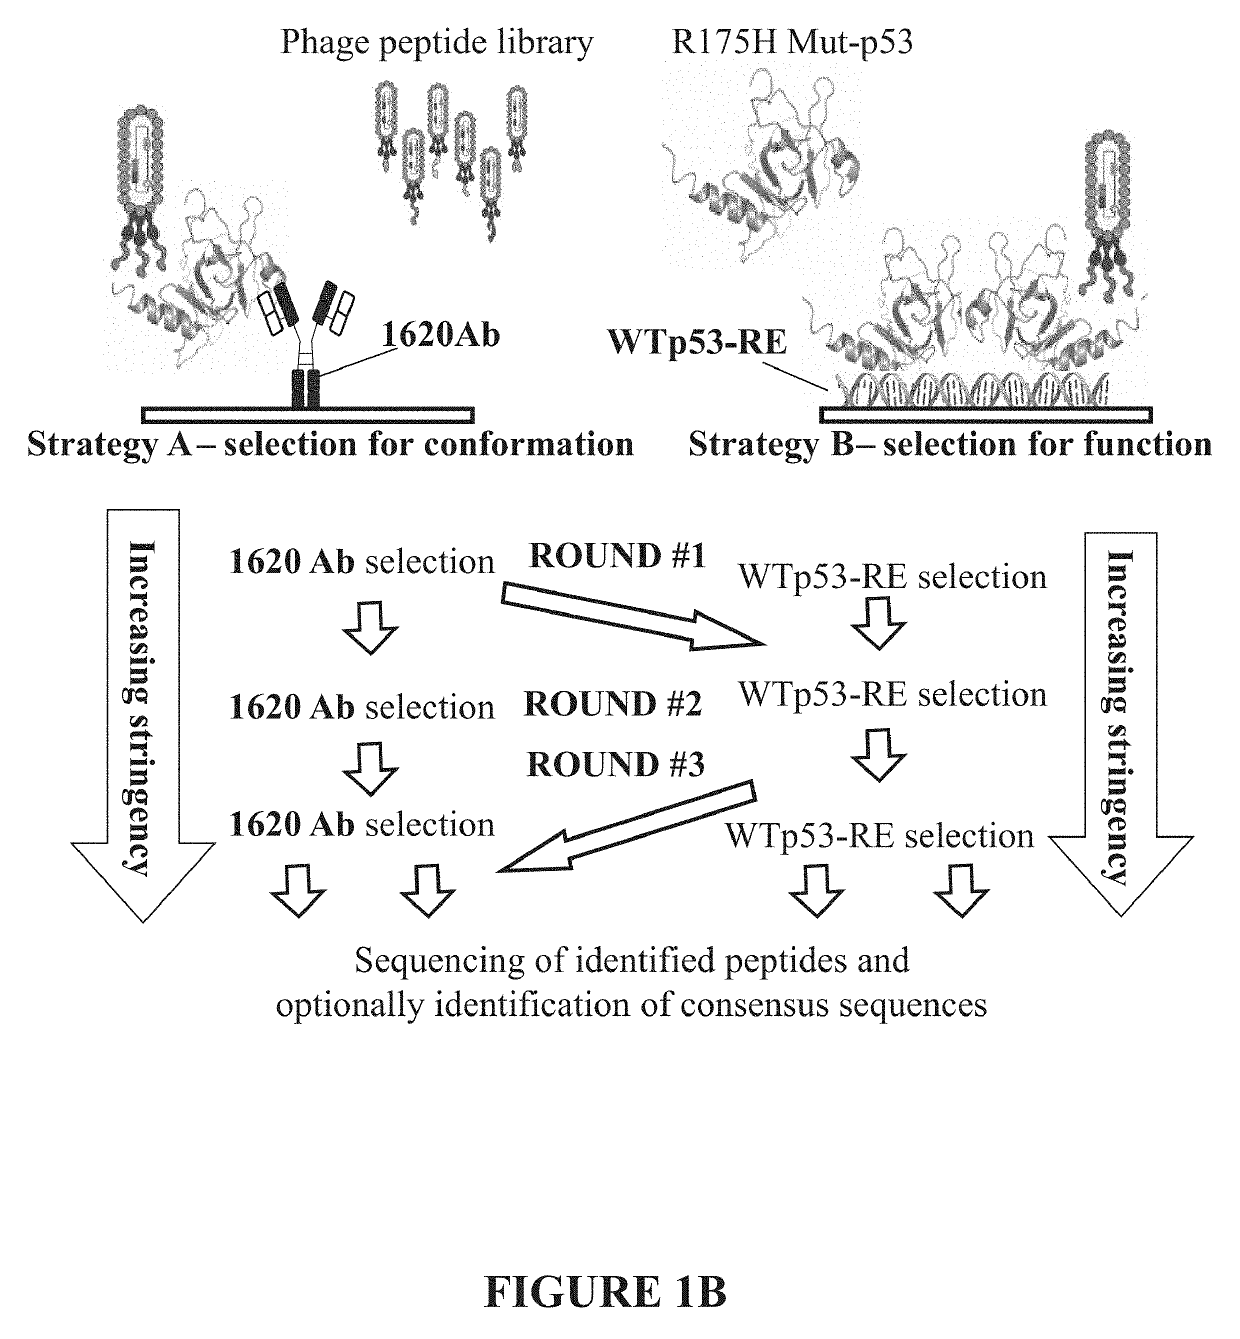 PEPTIDES CAPABLE OF REACTIVATING p53 MUTANTS